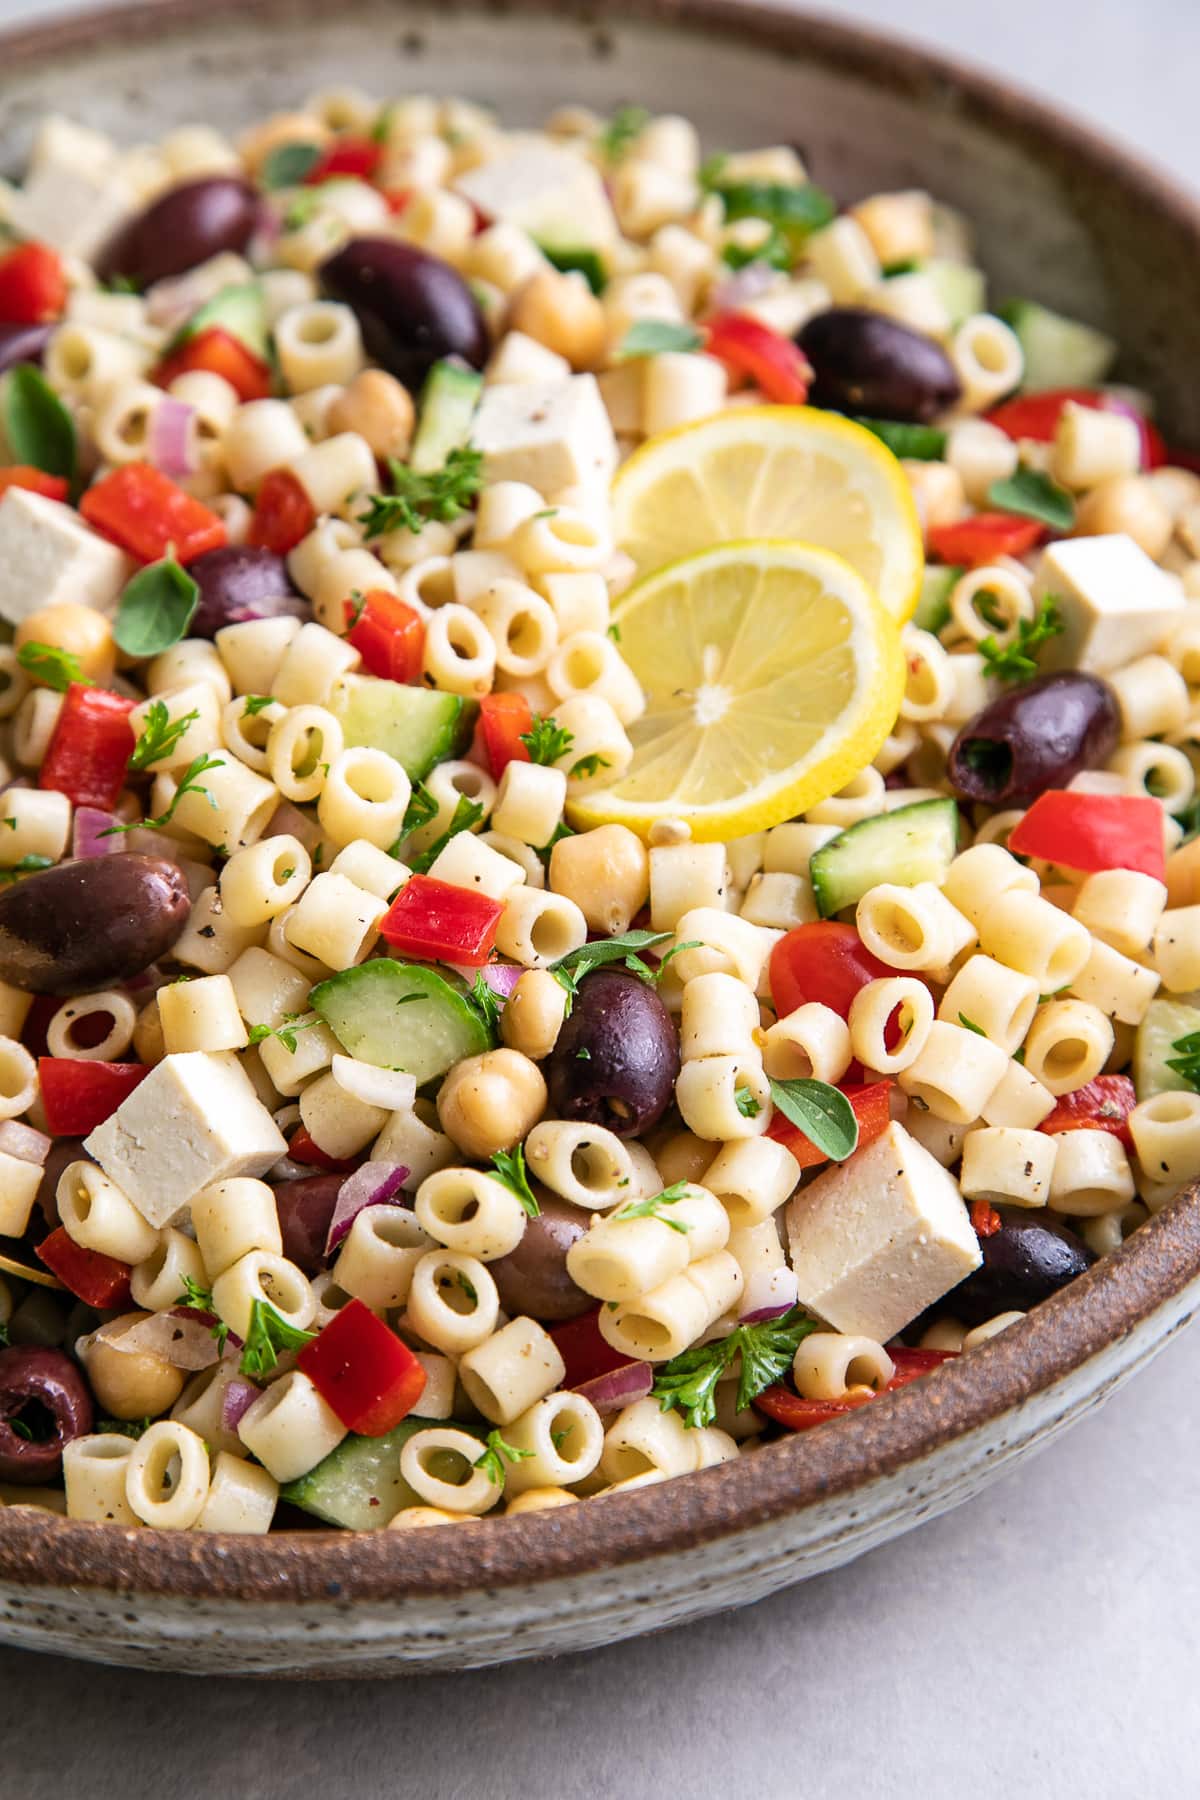 side angle view of healthy, vegan Greek pasta salad in a serving bowl with gold serving spoon.